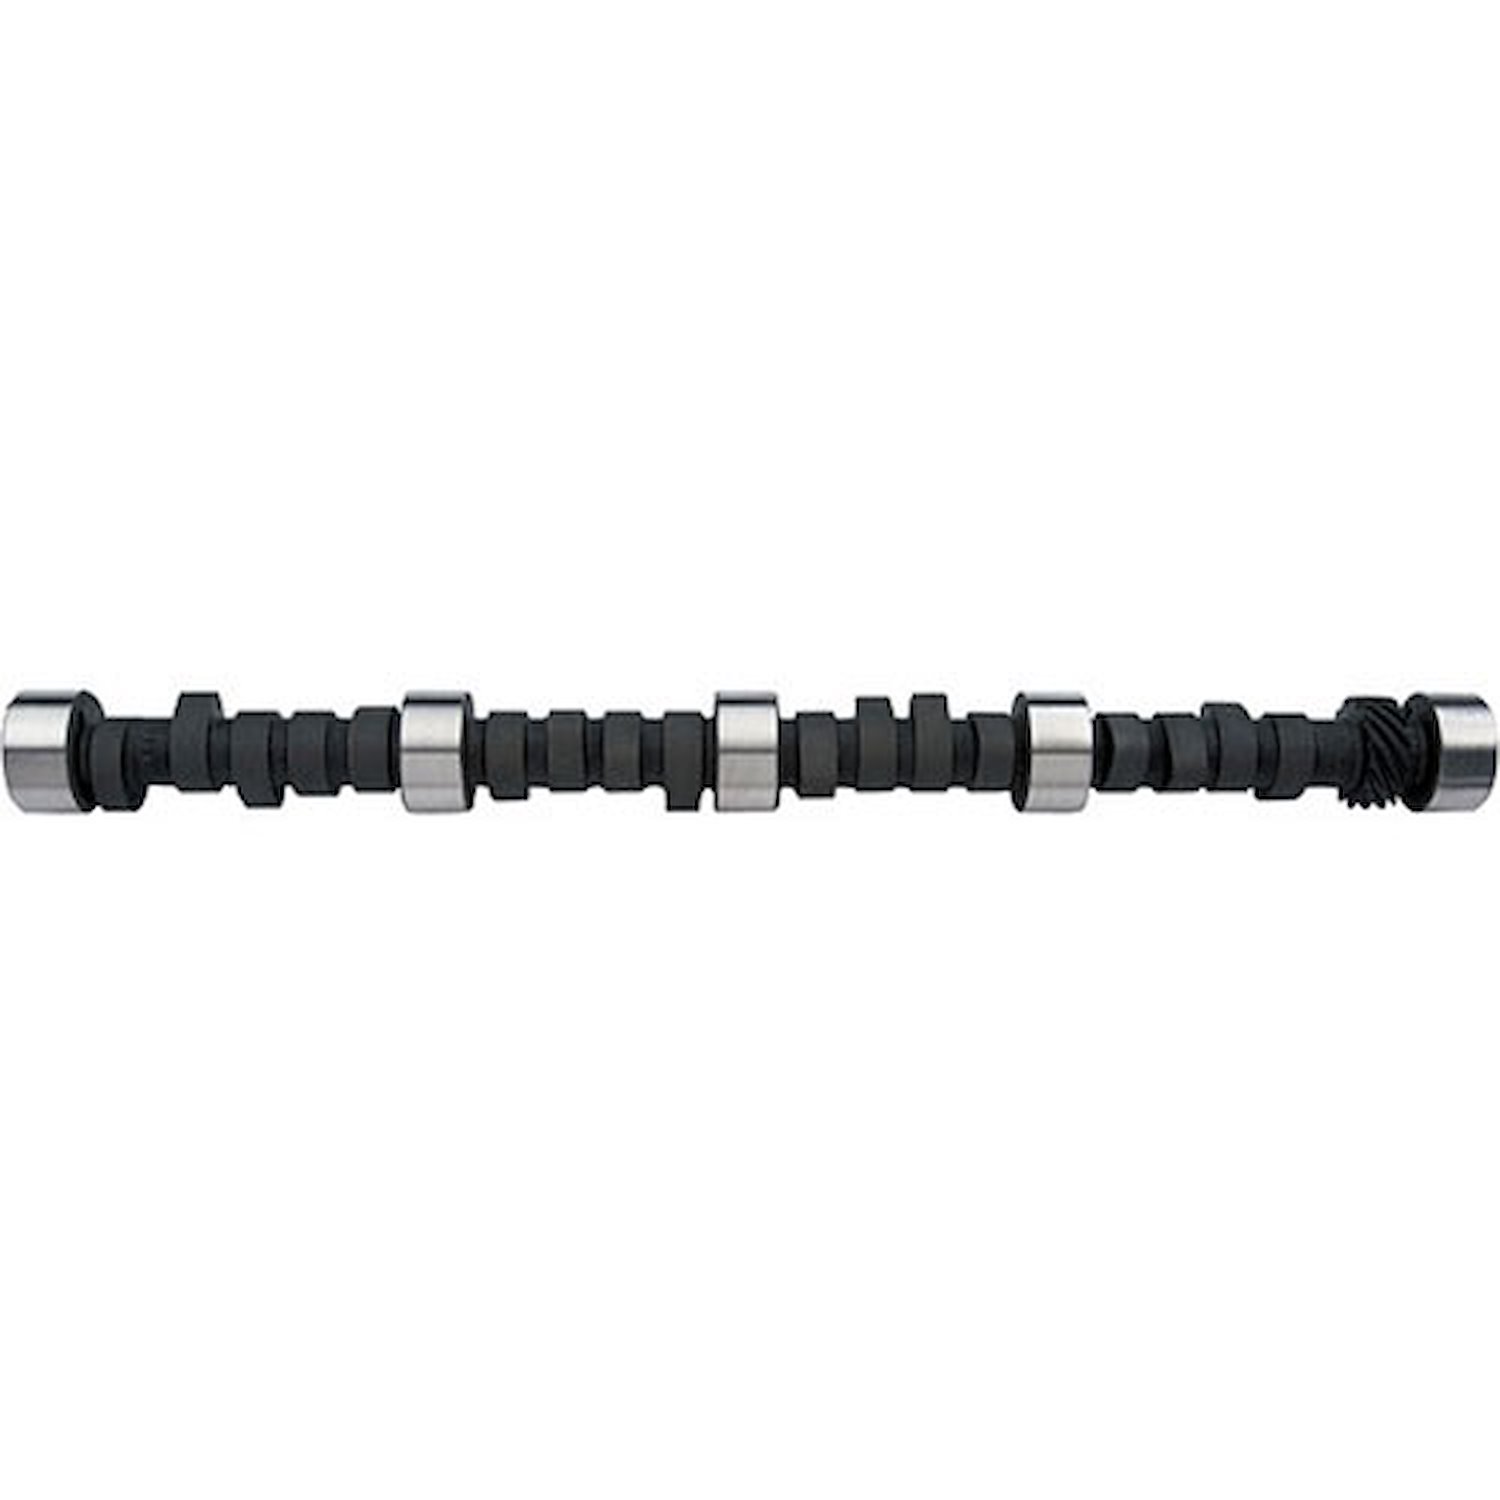 Hydraulic Flat Tappet Camshaft 1968-81 Small Block Chevy